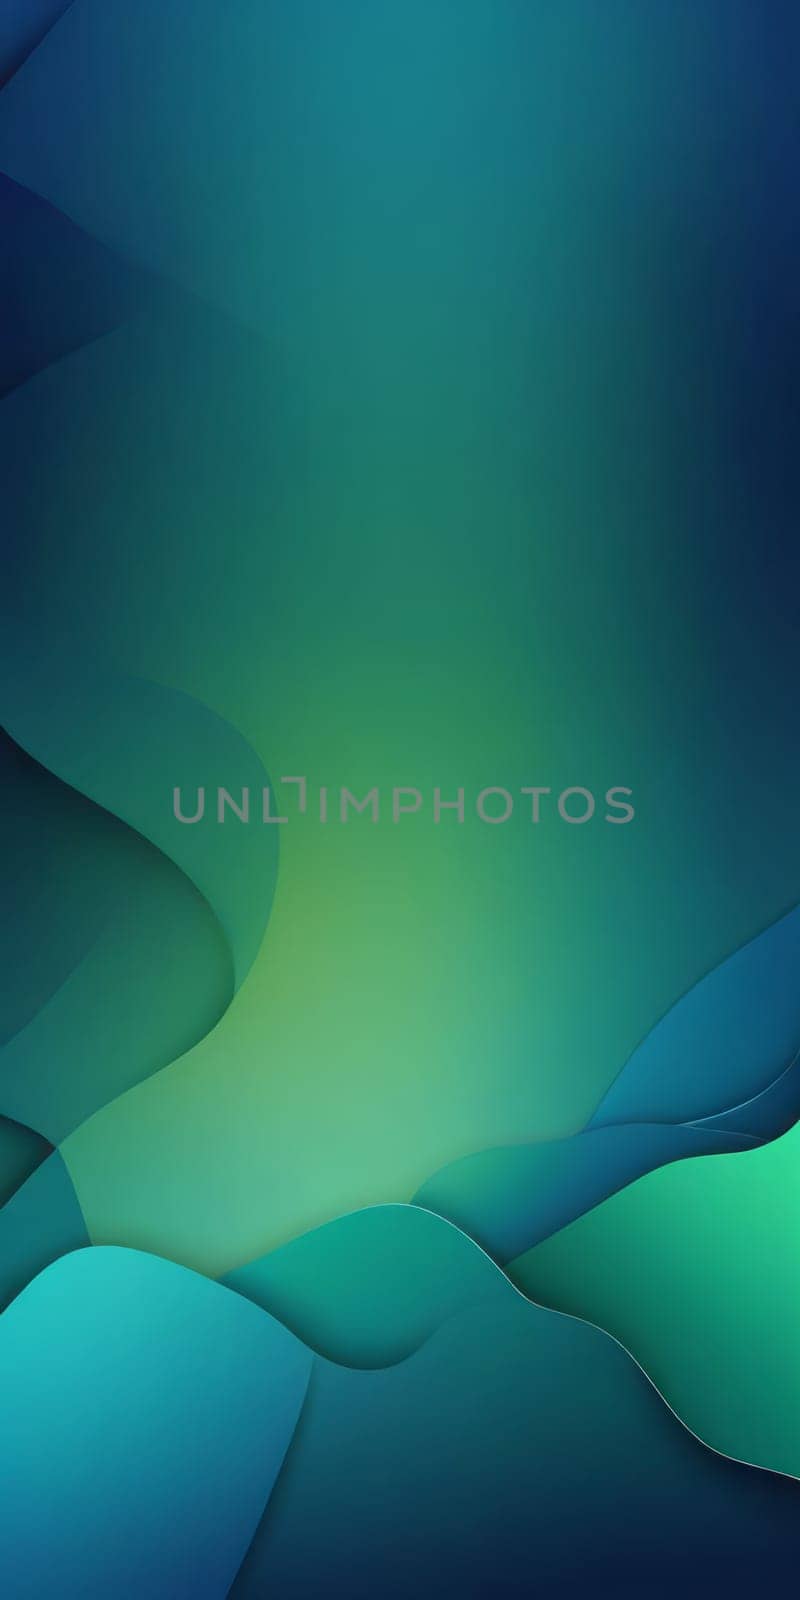 Hollow Shapes in Blue and Green by nkotlyar